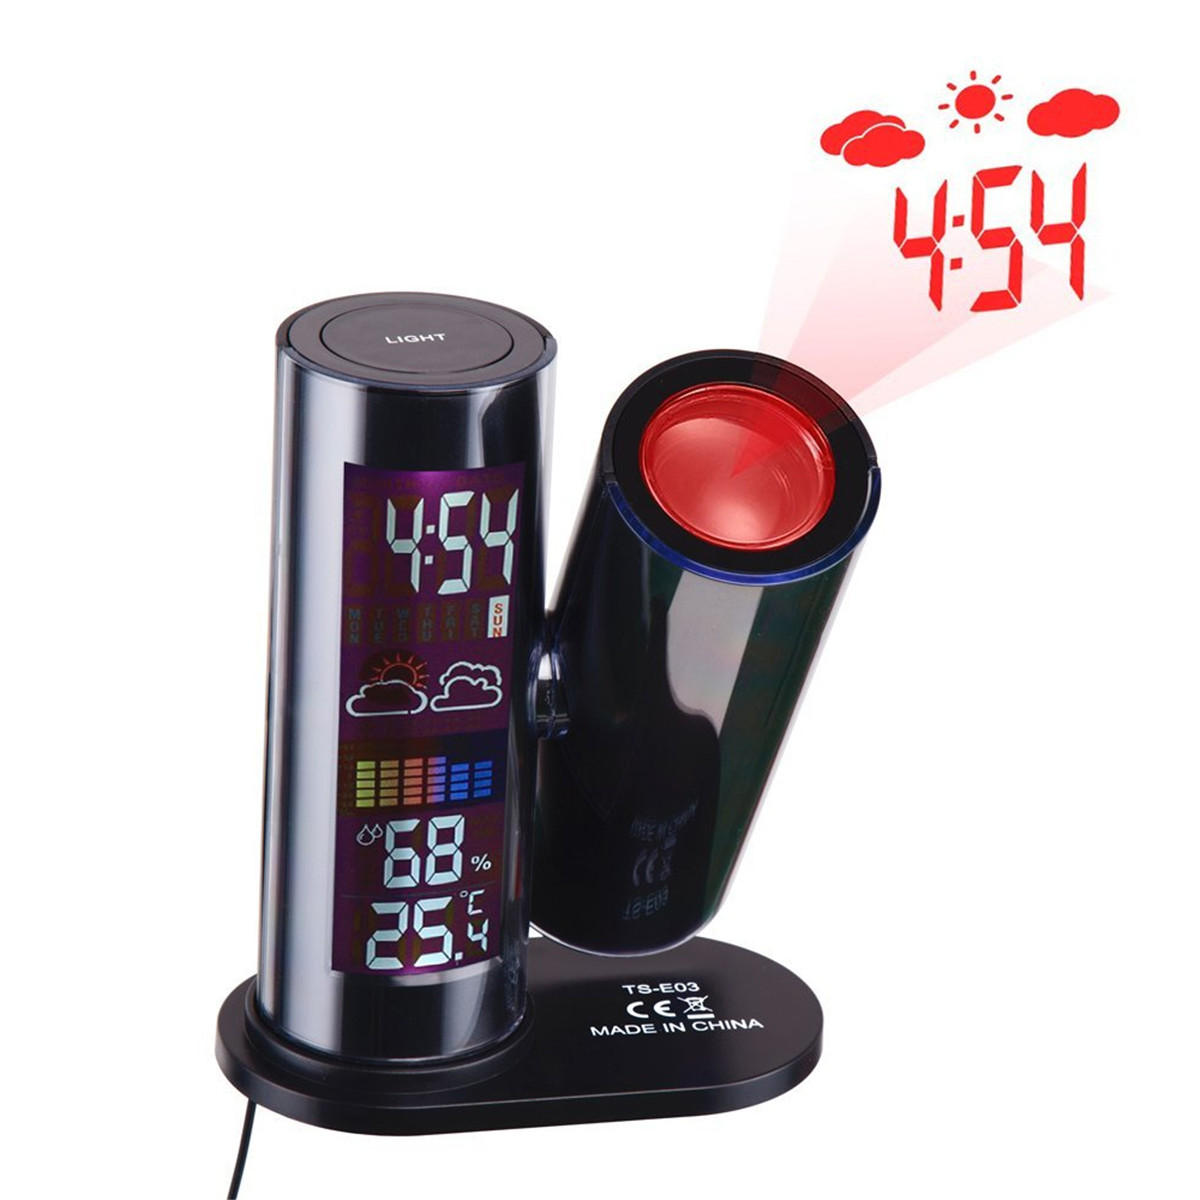 

TS-E03 LCD Digital Projection Weather Date Temperature Humidity Meter 360° Rotatable LED Alarm Clock Digital Thermometer